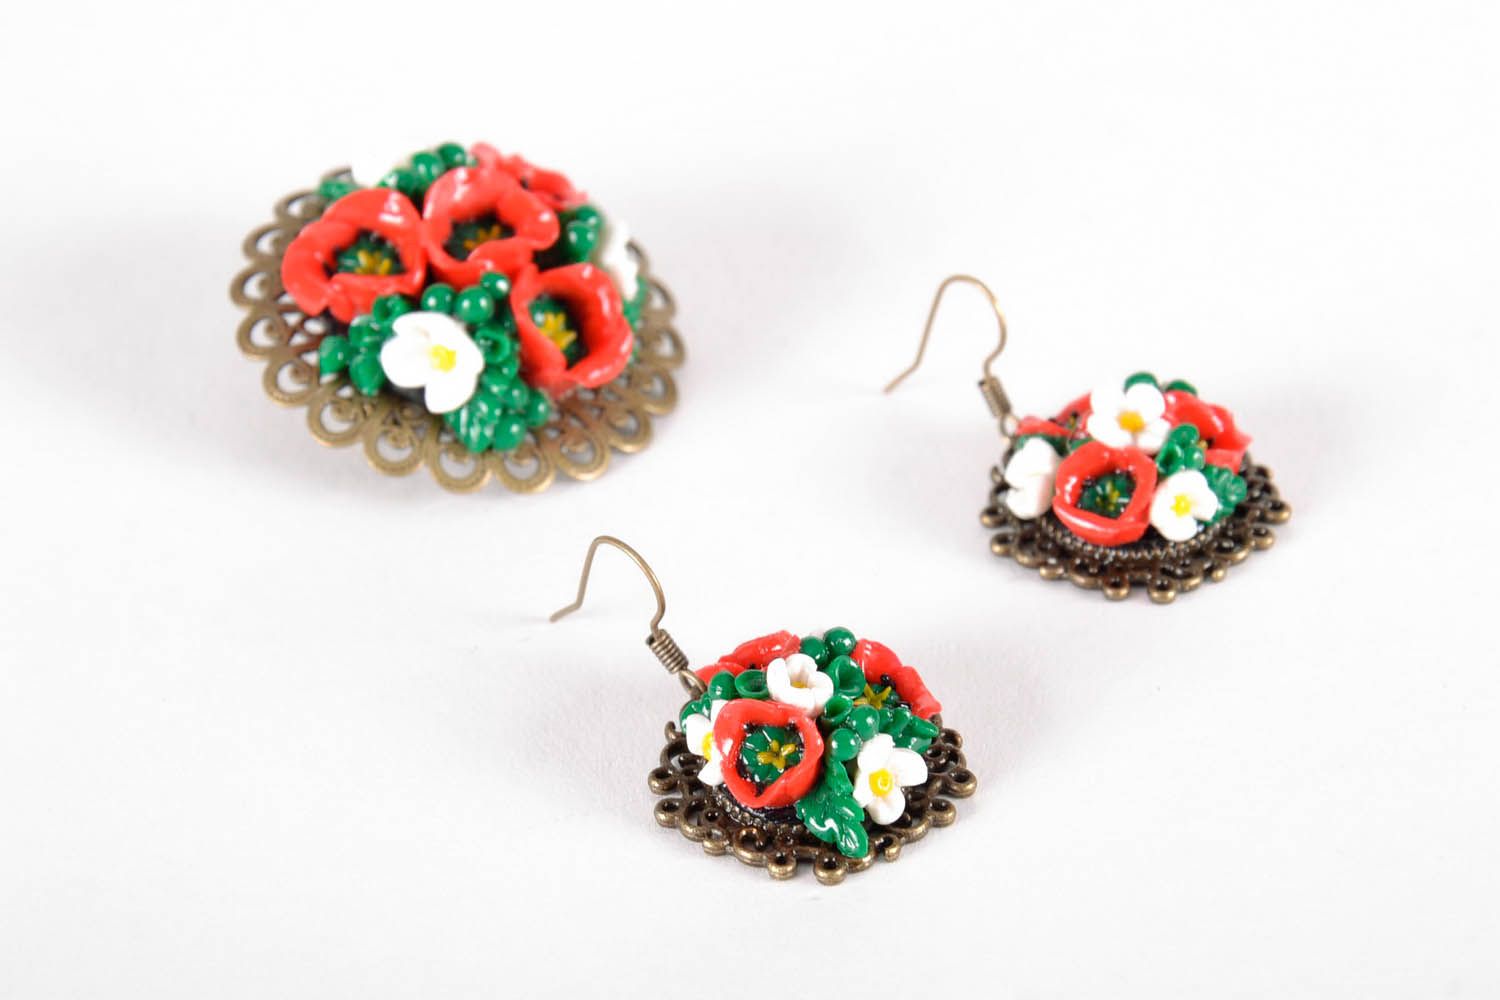 Earrings and brooch made of polymer clay photo 3